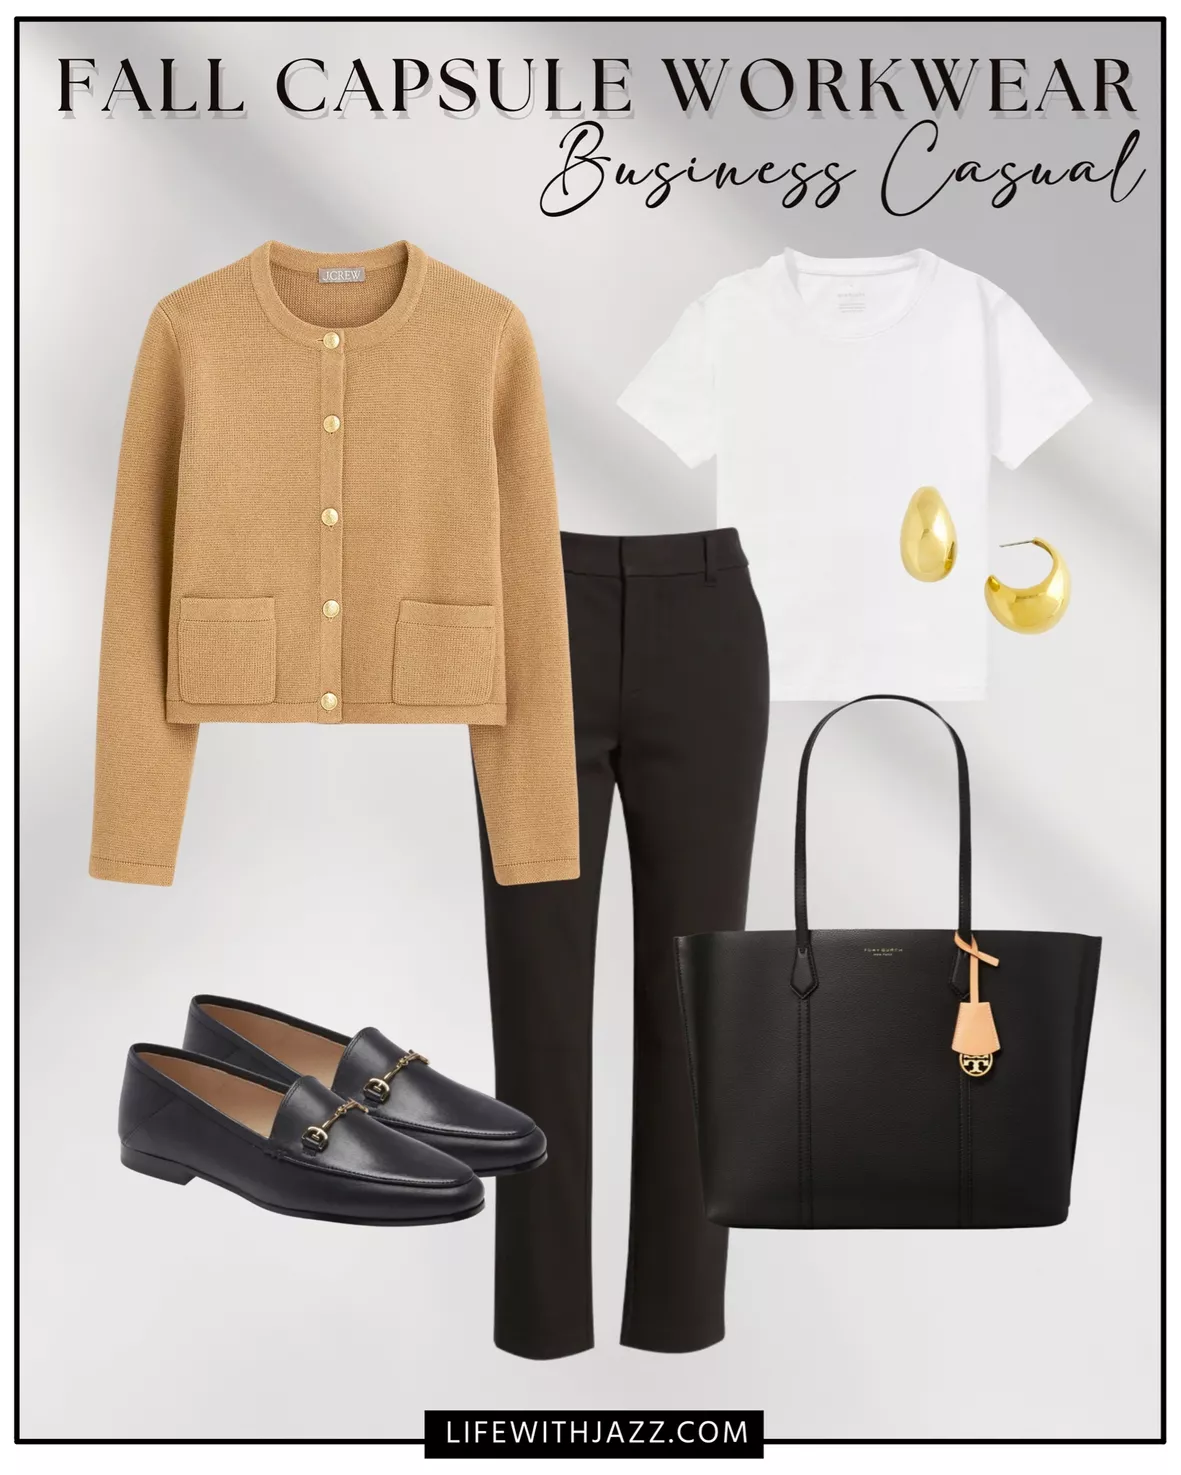 Business Casual Workwear Capsule + 20 Outfit Ideas - LIFE WITH JAZZ